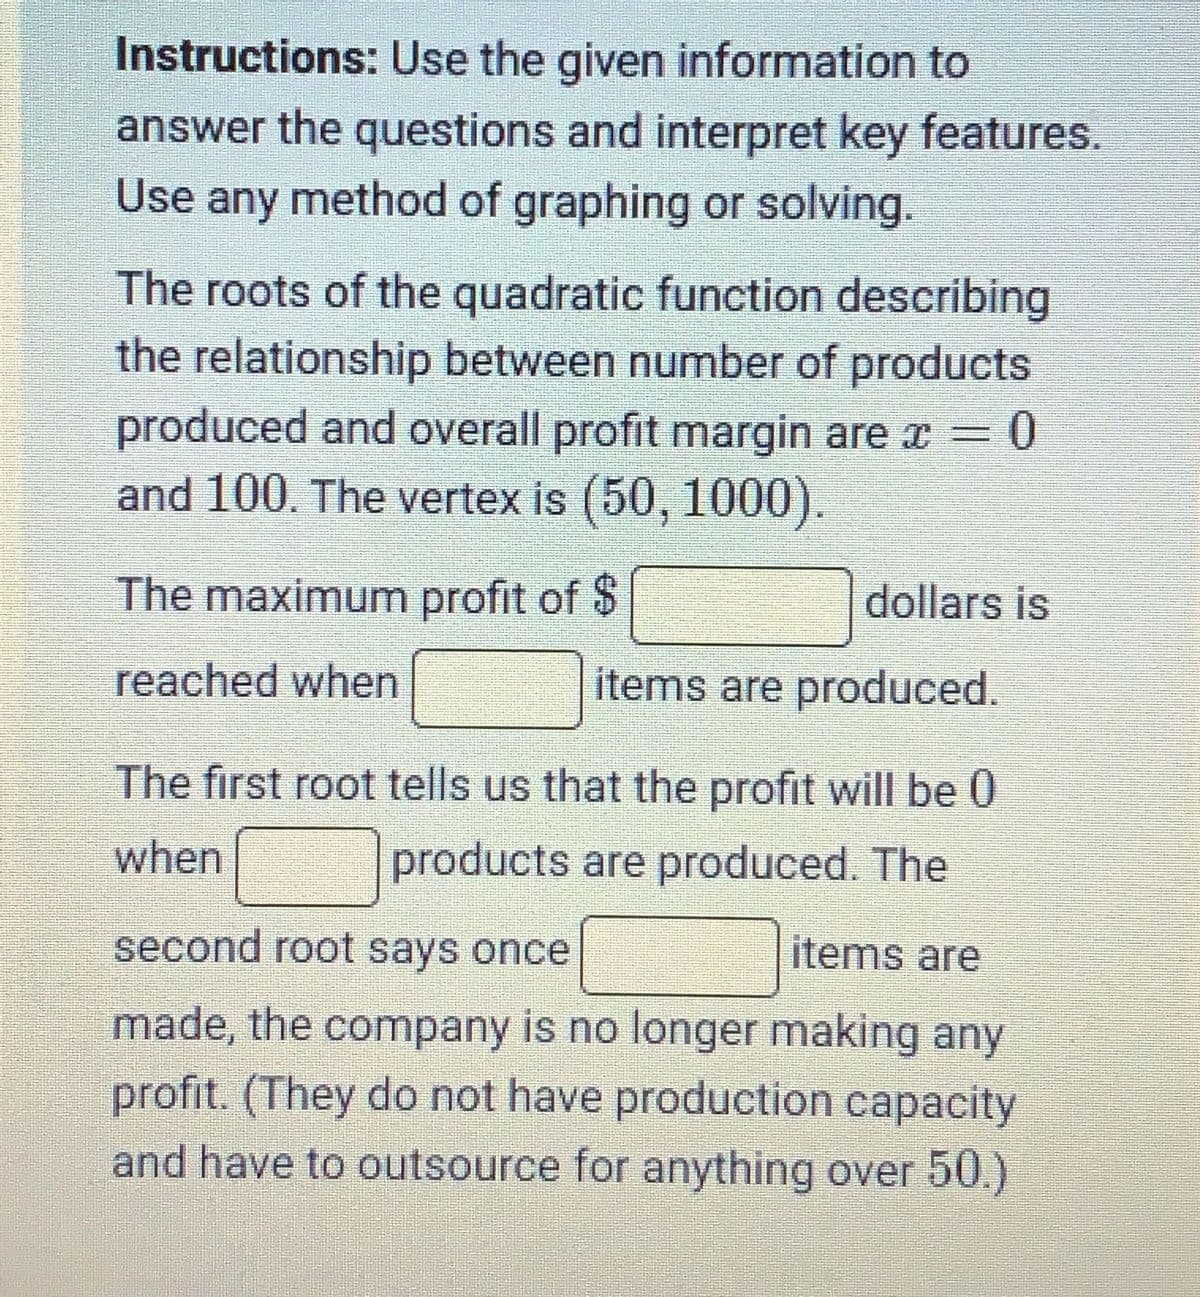 Instructions: Use the given information to
answer the questions and interpret key features.
Use any method of graphing or solving.
The roots of the quadratic function describing
the relationship between number of products
produced and overall profit margin are c
and 100. The vertex is (50, 1000).
The maximum profit of $
reached when
dollars is
items are produced.
The first root tells us that the profit will be 0
when
products are produced. The
second root says once
items are
made, the company is no longer making any
profit. (They do not have production capacity
and have to outsource for anything over 50.)